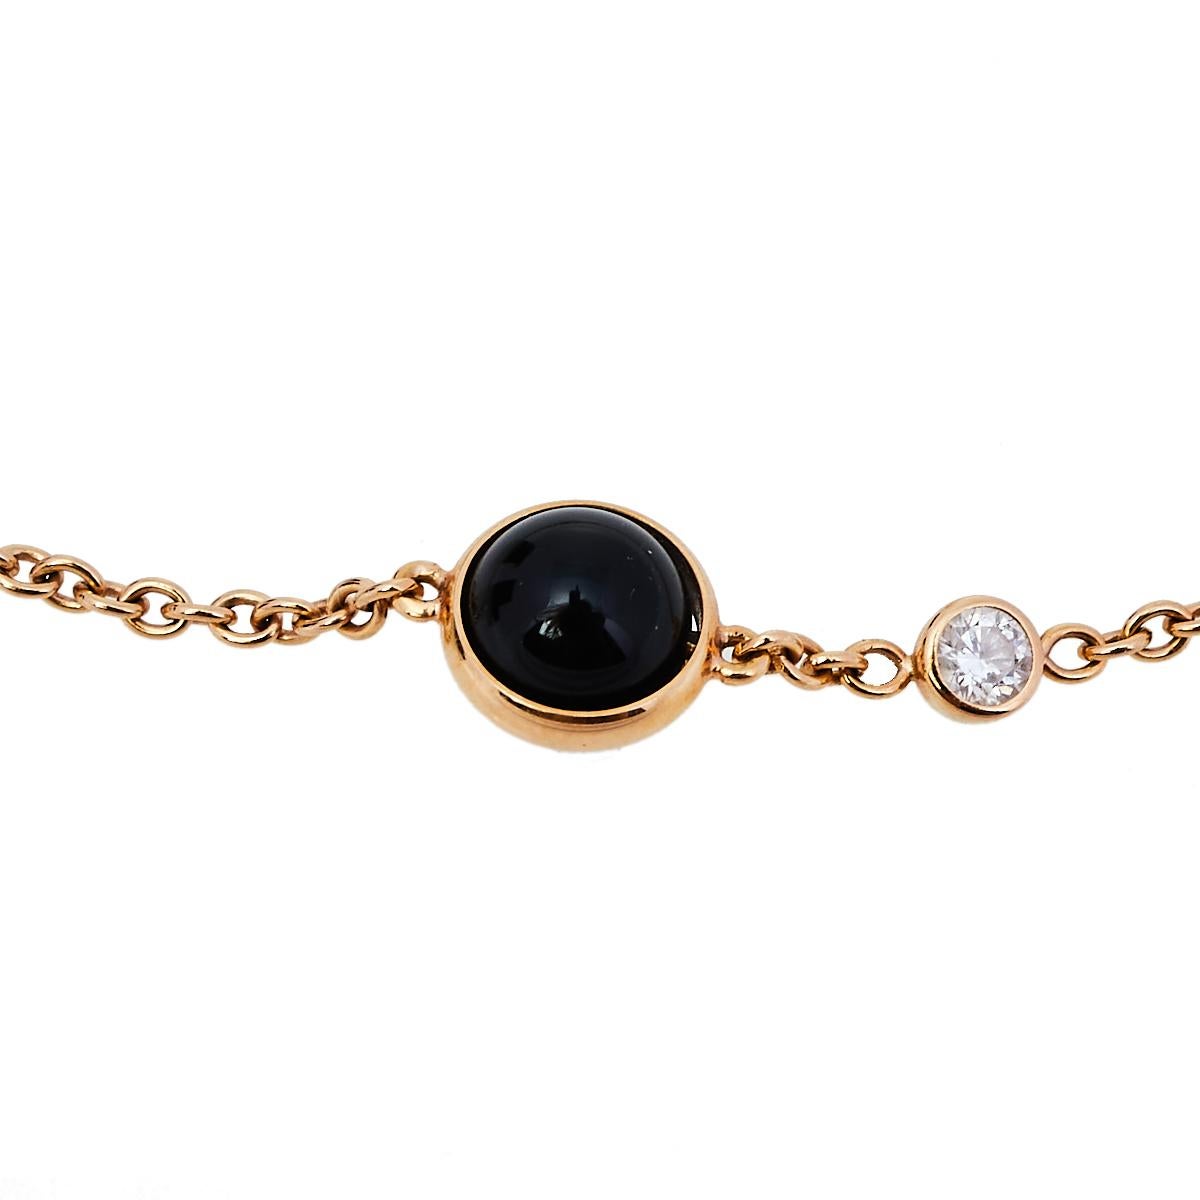 This charming Piaget Possession bracelet celebrates timeless elegance and unmatched grace. Set along an 18K rose gold chain that is decorated with a small diamond and a round onyx charm, this piece will add a touch of radiance to your wrist. One